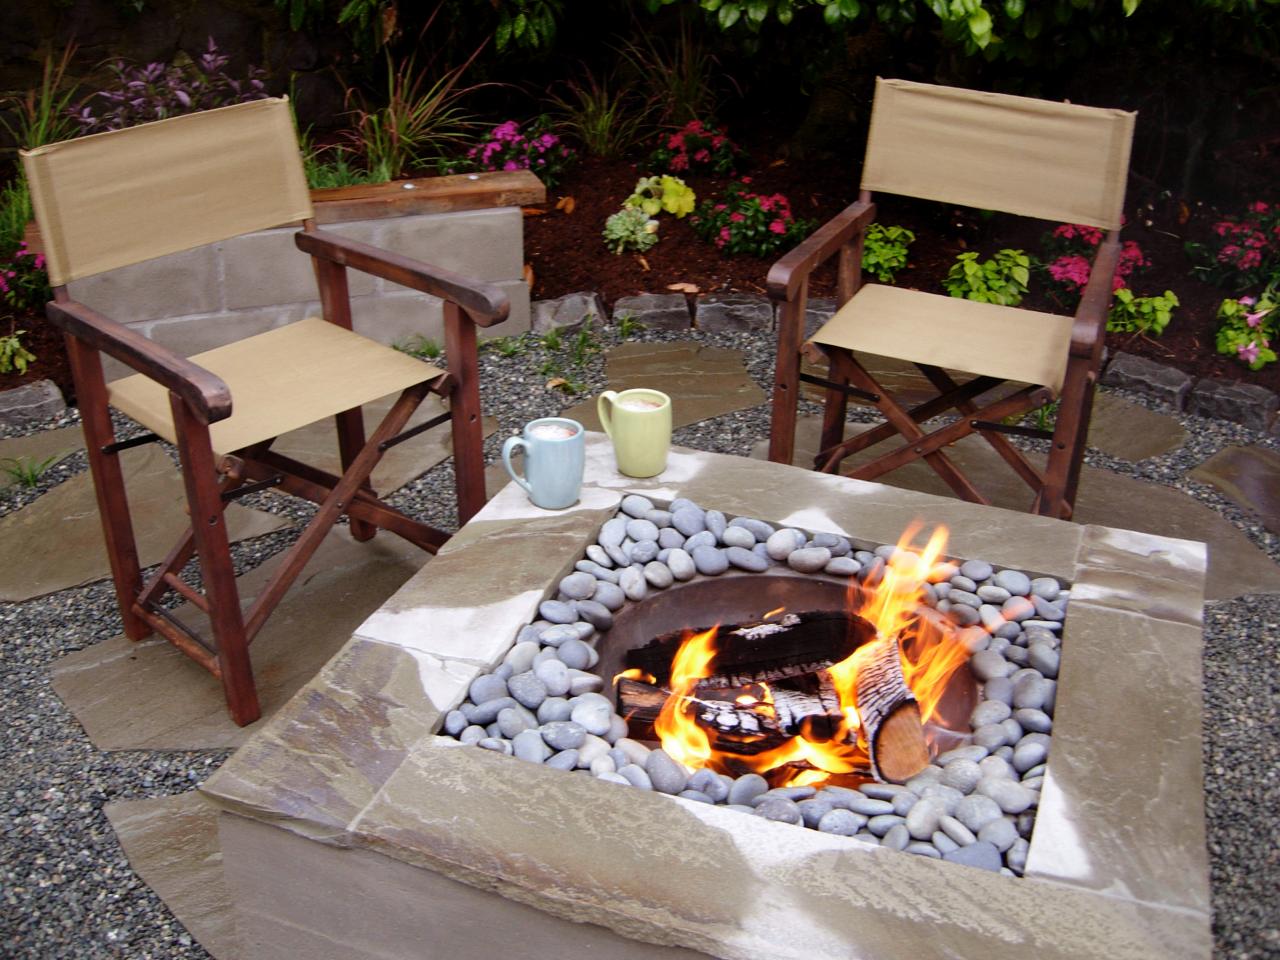 How To Make A Concrete Fire Feature, Can You Have A Small Fire Pit In Your Backyard